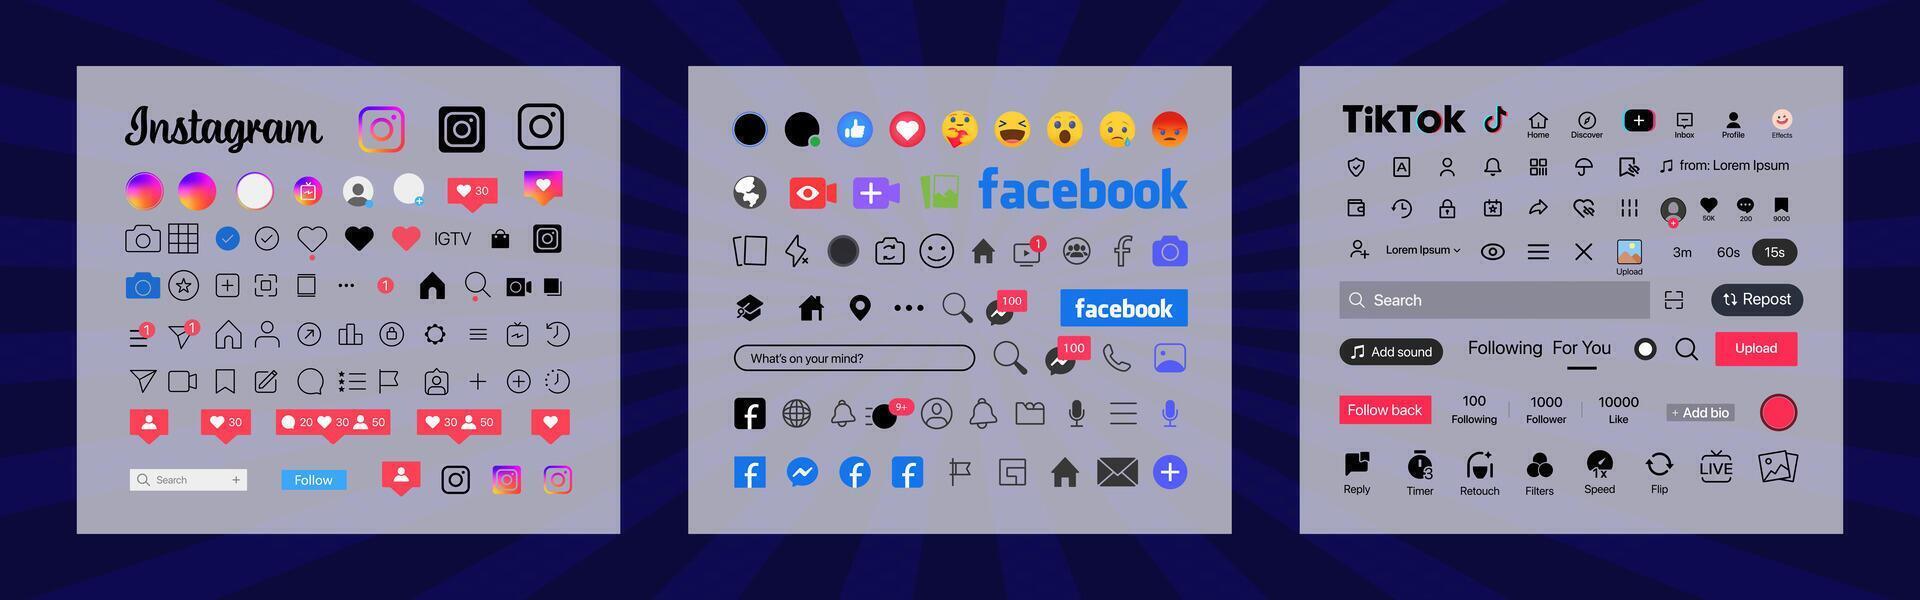 Instagram, Tik Tok, Facebook button icon. Set screen social media and social network interface template. Stories user button, symbol, sign logo. Stories, liked, stream. Editorial vector illustration